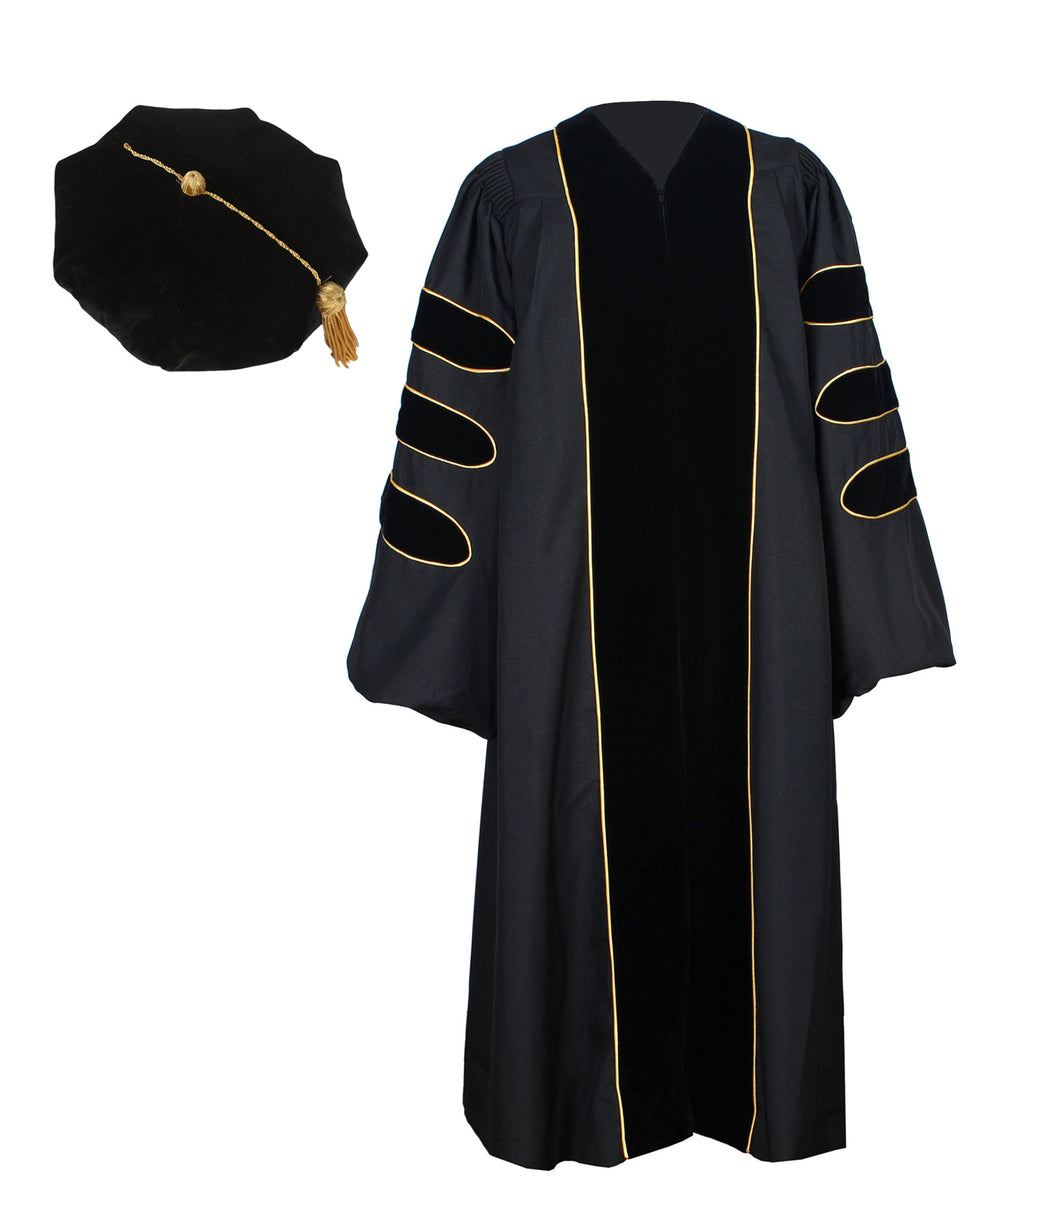 doctorate of education graduation gown